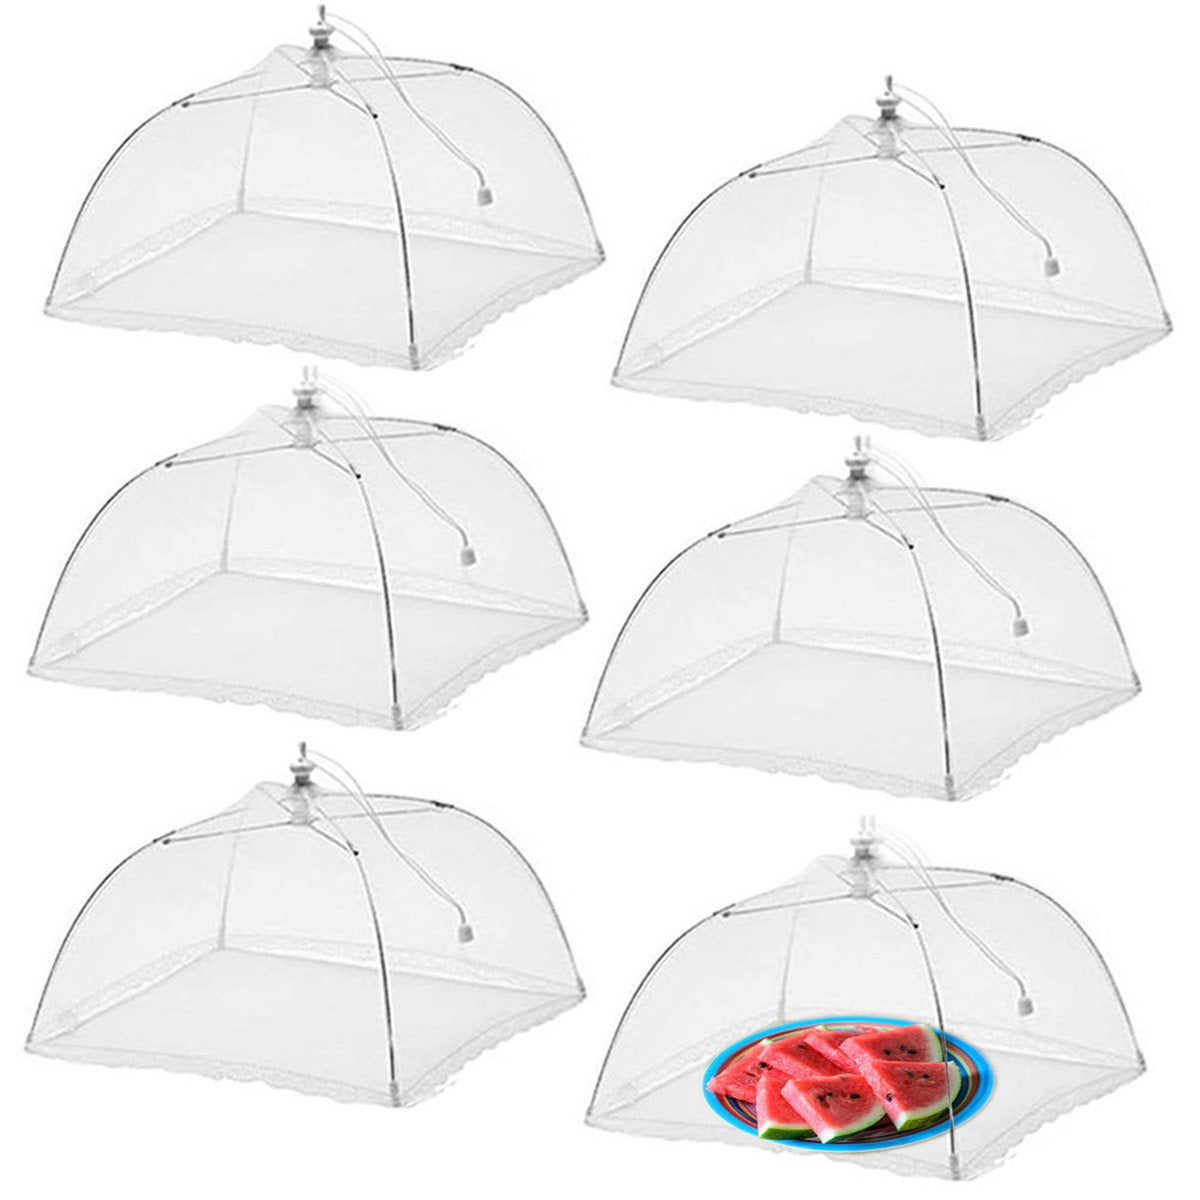 6pk Pop-Up 17x17” Large Outdoor Food Covers - Keep Bugs Out